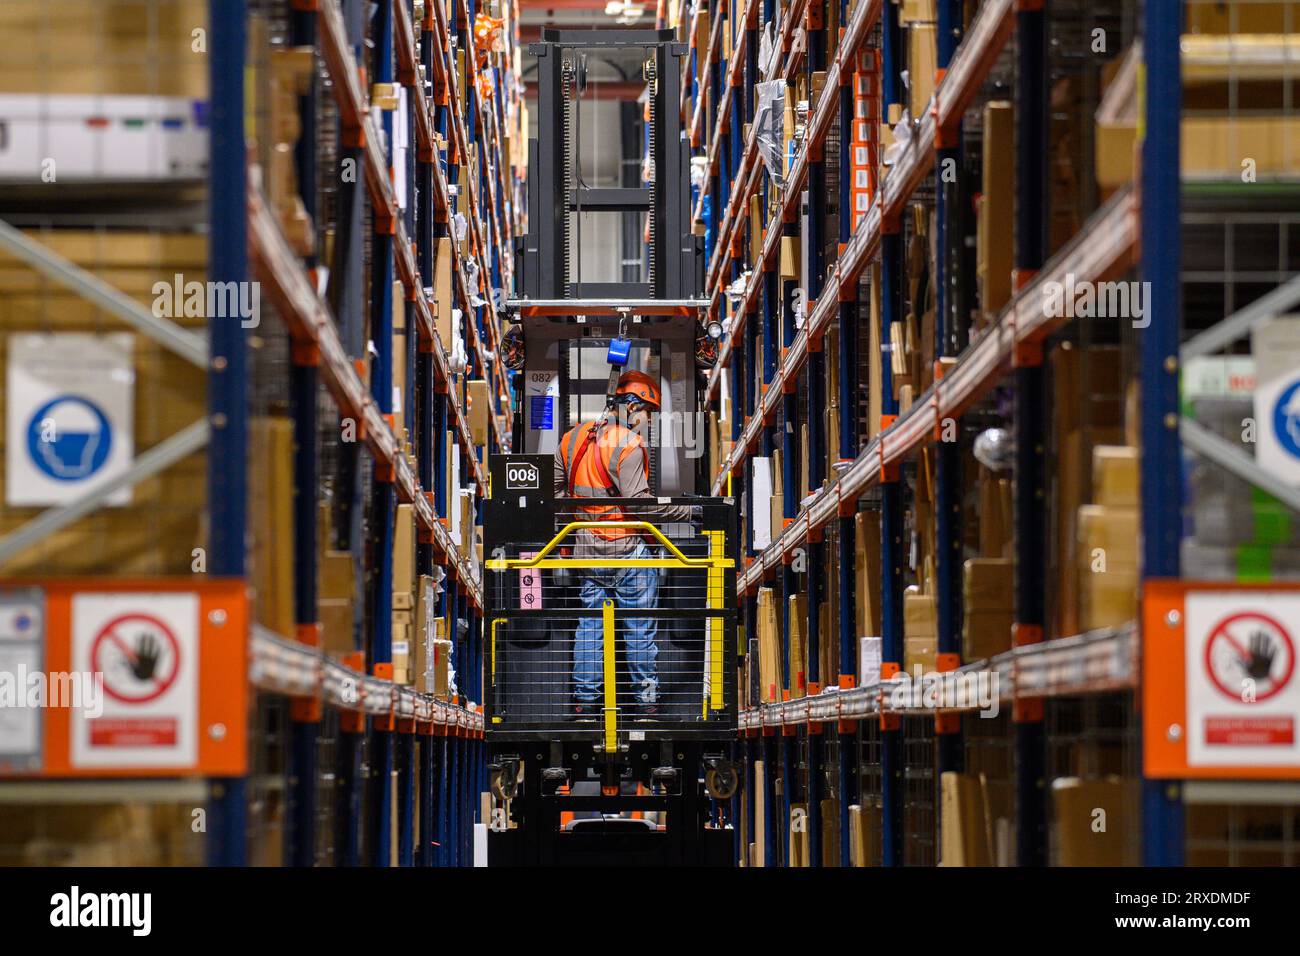 PRODUCTION - 07 September 2023, Saxony-Anhalt, Sülzetal: A forklift truck drives through high shelves in which goods are stored at the Amazon logistics center in Sülzetal. Amazon is specifically recruiting members of the German armed forces. For some time now, the mail order company has been explicitly advertising its 'Military Recruitment Program' to attract military personnel as employees. In times of a shortage of skilled workers, this is a field that is apparently becoming increasingly interesting for other companies as well. (to dpa: 'Recruits for the free economy - companies rely on sold Stock Photo